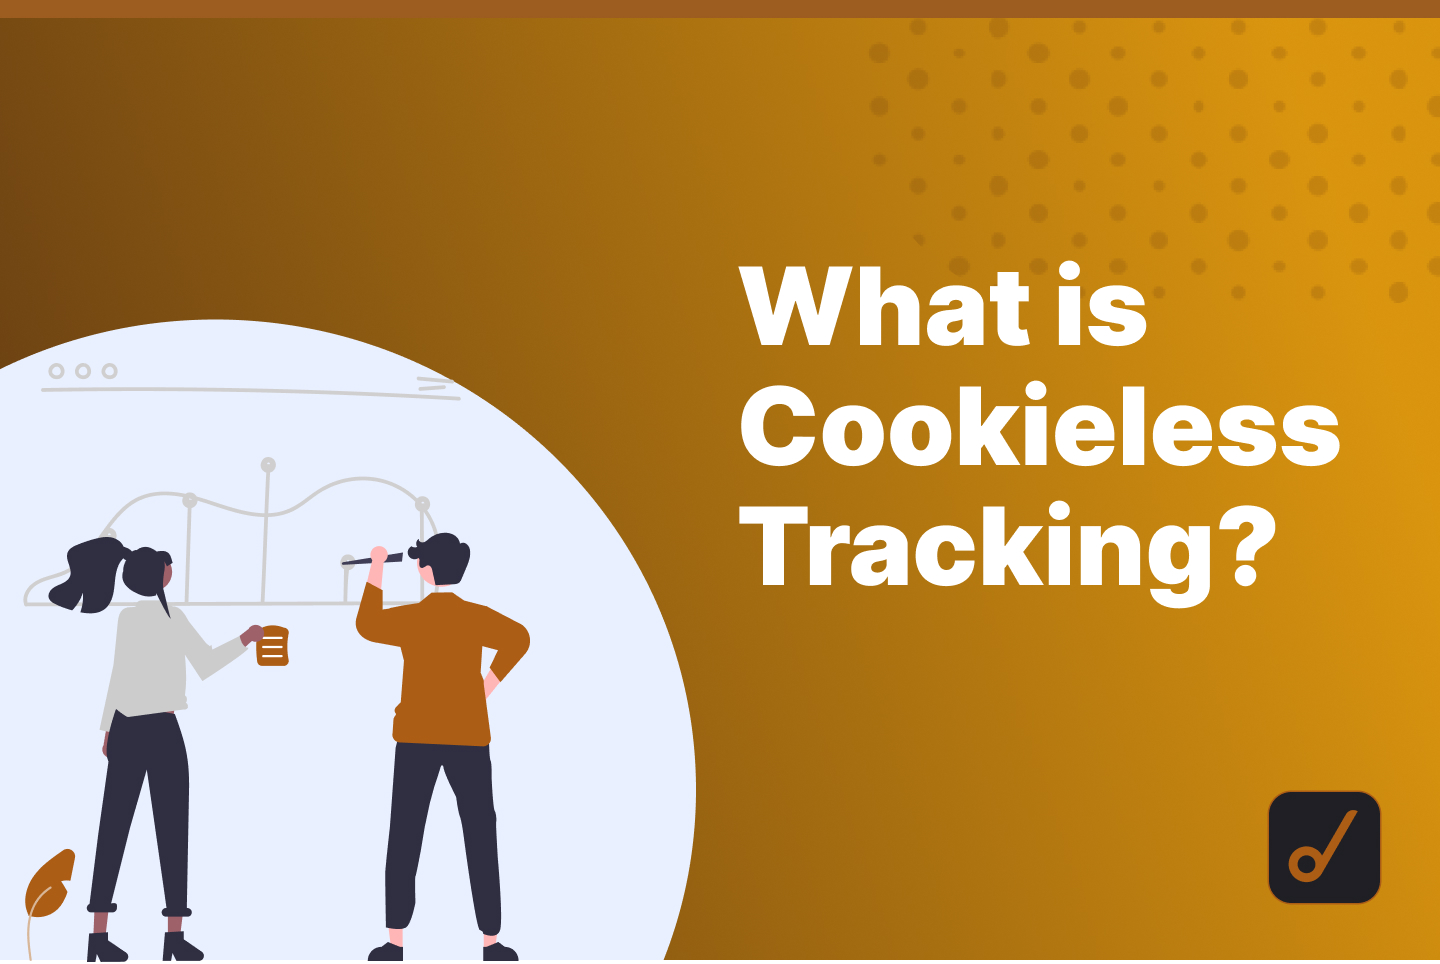 Leave Cookies for Santa; Cookieless Tracking is the Future!